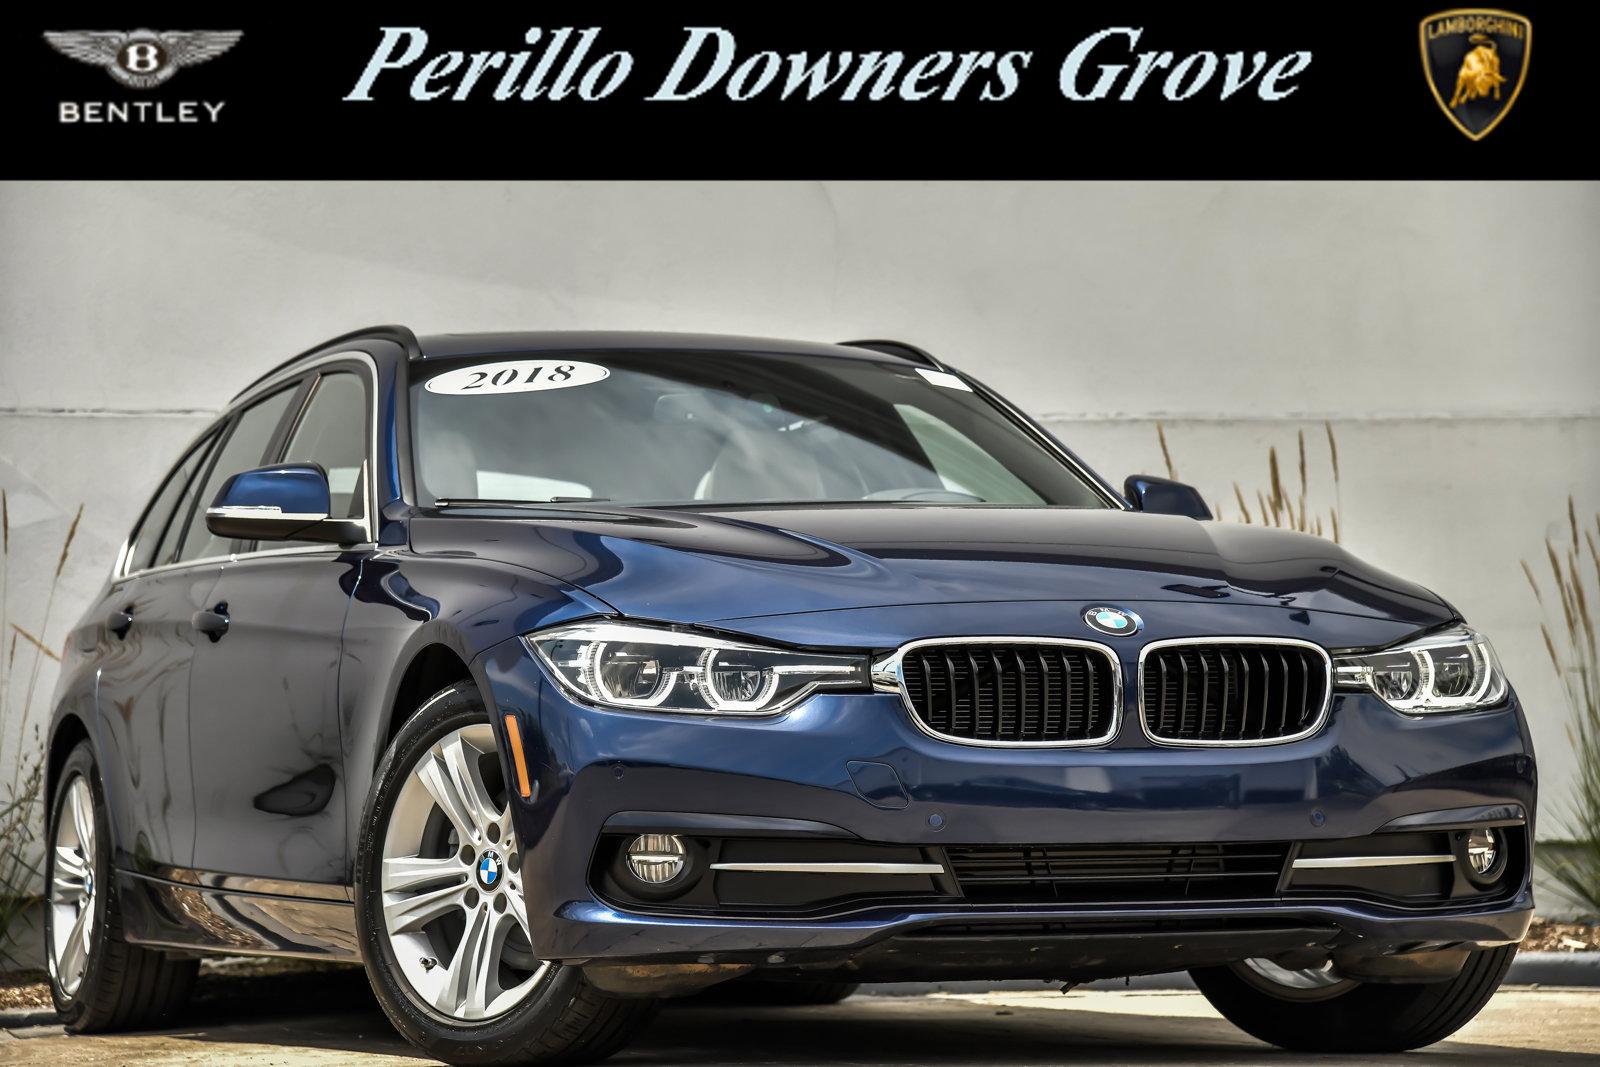 Used 2018 BMW 3 Series 328d xDrive | Downers Grove, IL